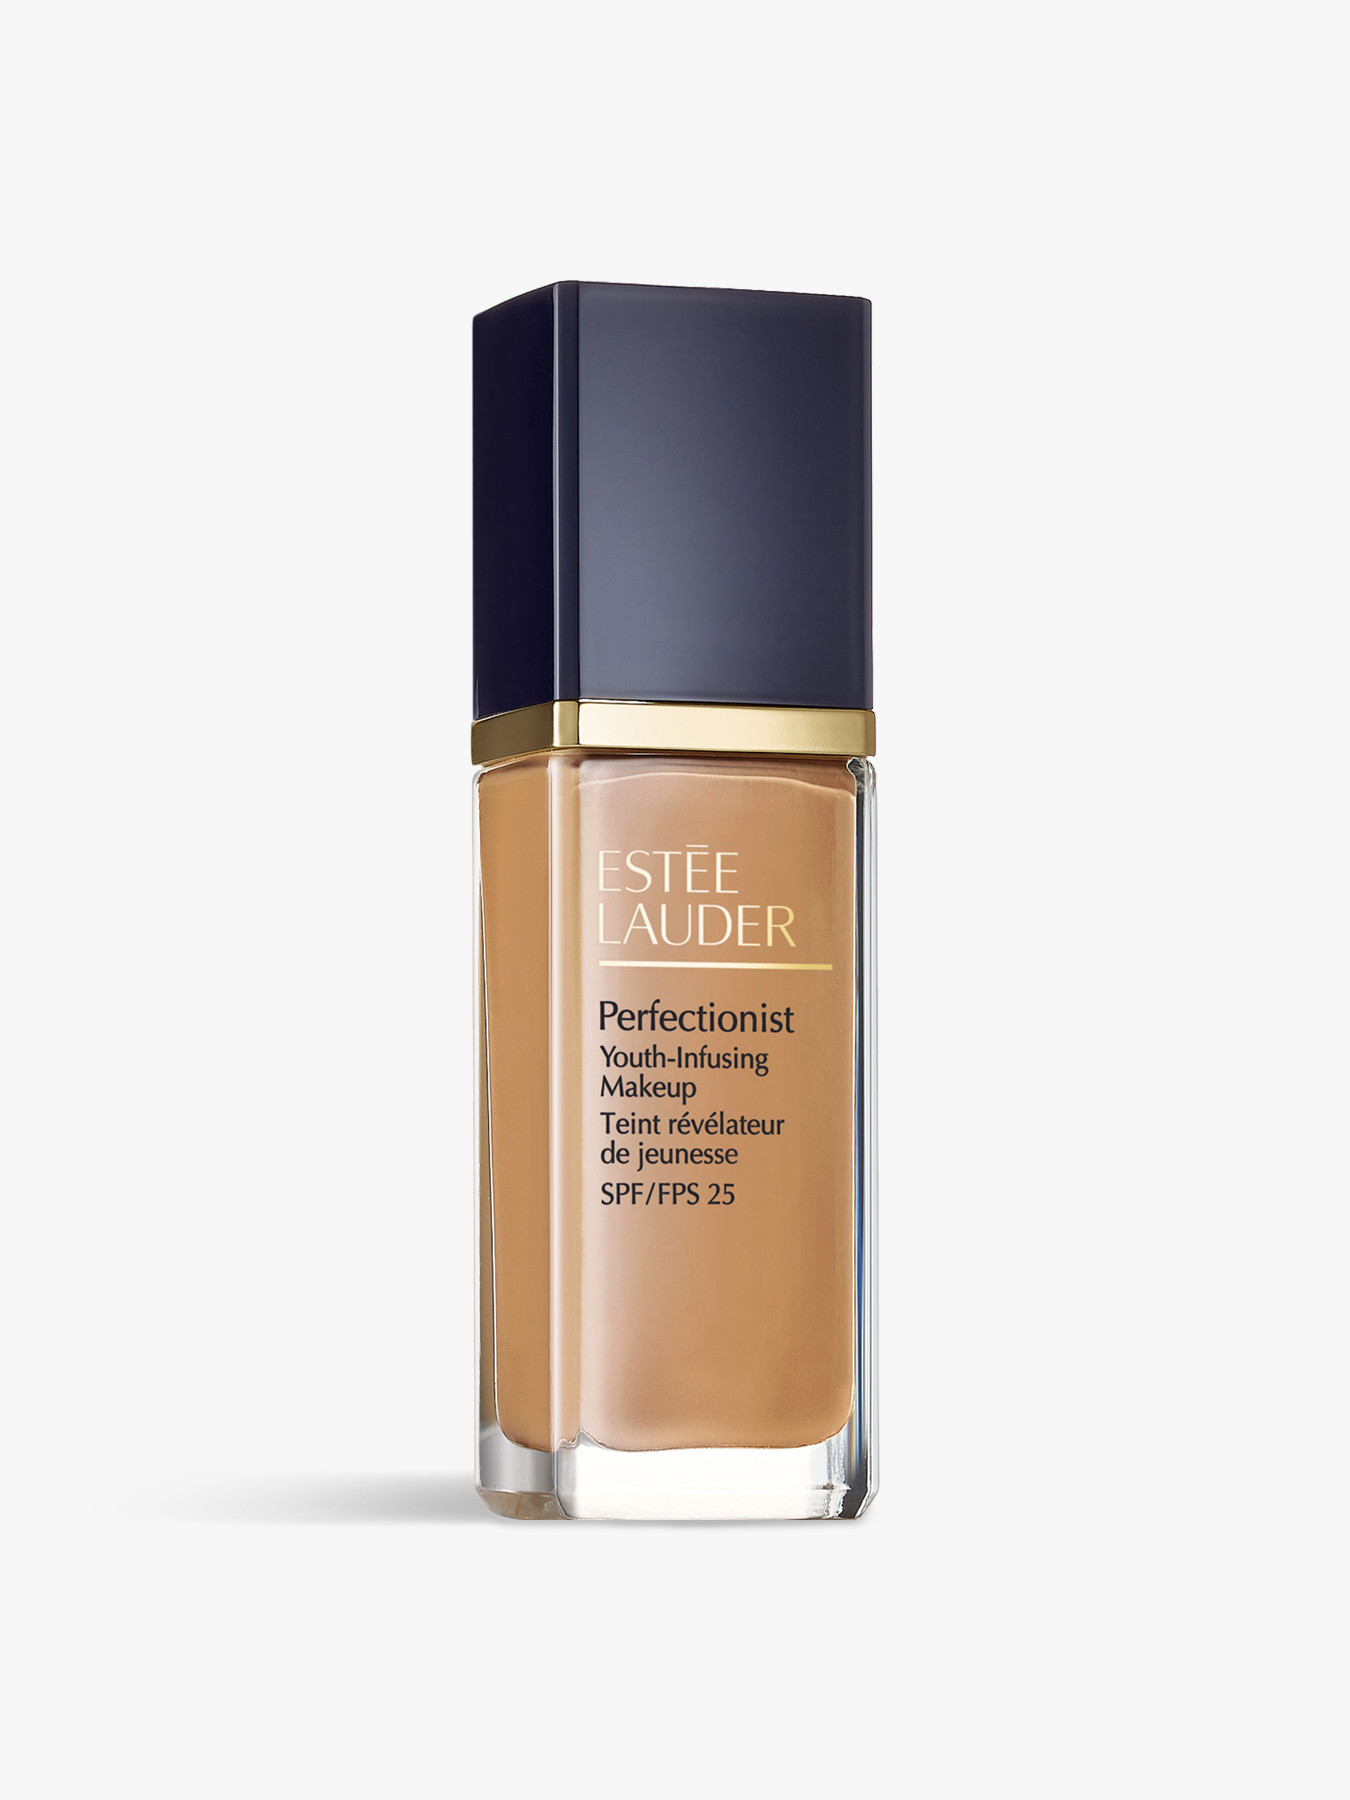  ESTEE LAUDER PERFECTIONIST YOUTH INFUSING MAKEUP SPF 25 REVIEW OF 2019